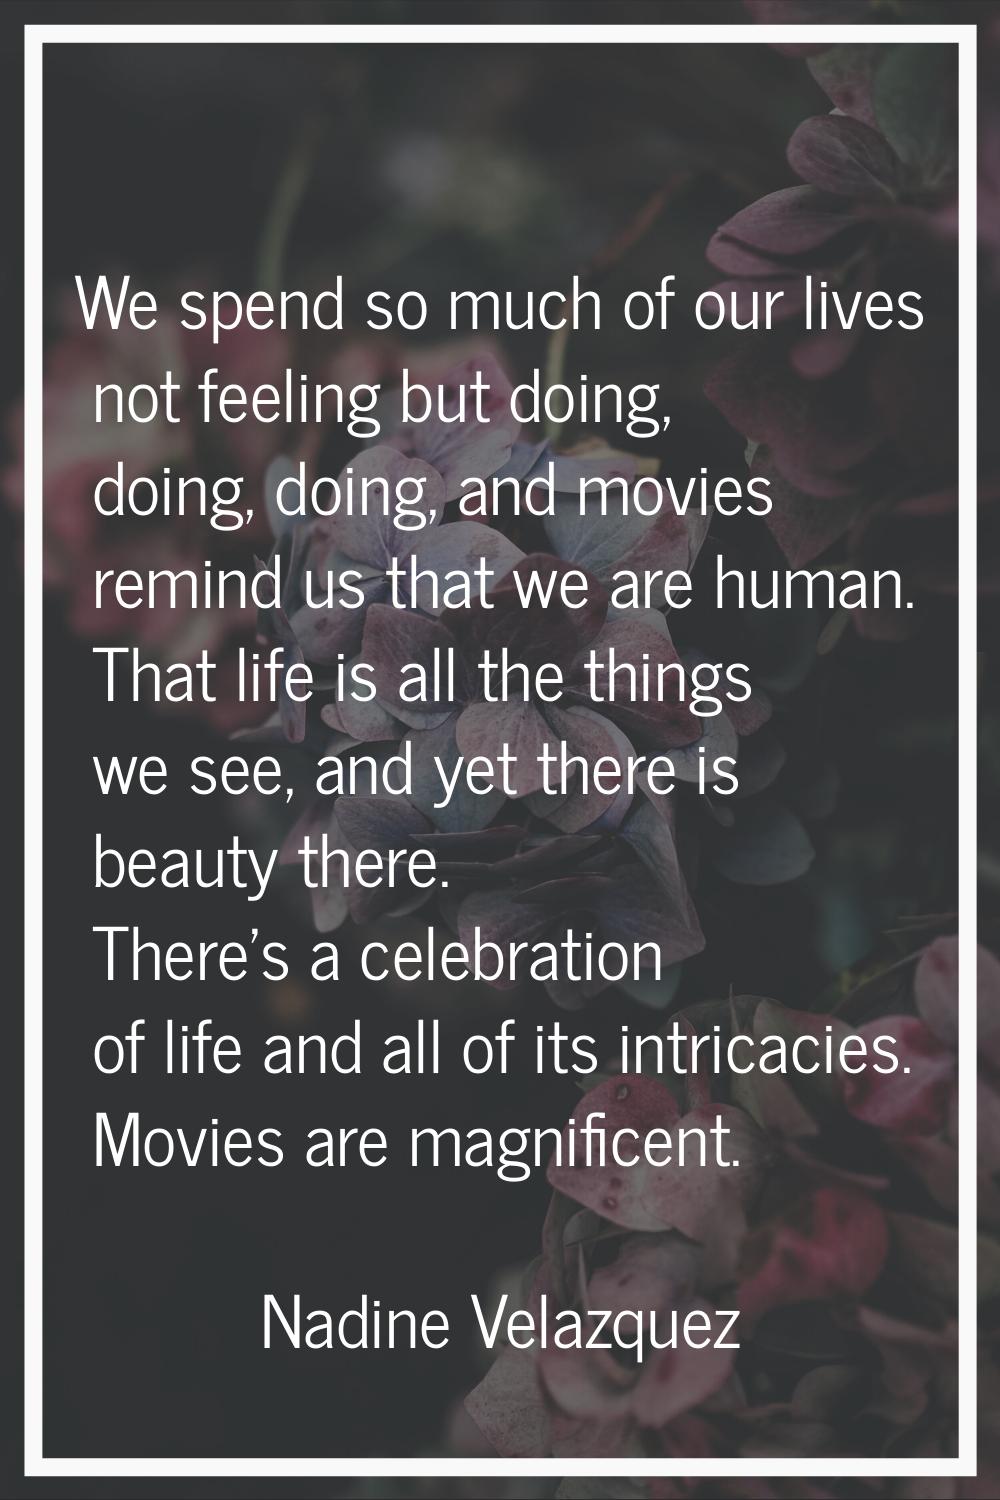 We spend so much of our lives not feeling but doing, doing, doing, and movies remind us that we are